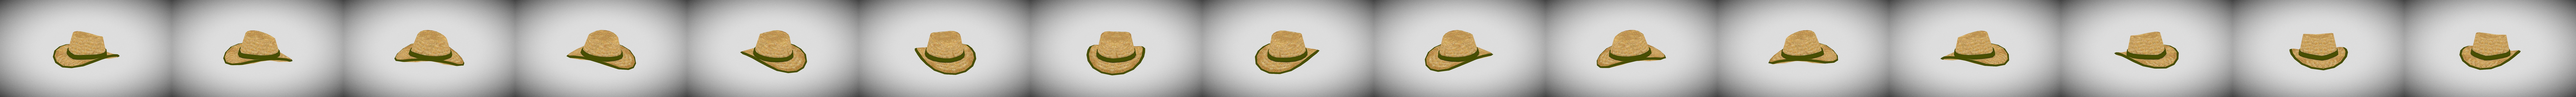 Straw Hat For Roblox Game Buy Royalty Free 3d Model By Catafest Catafest 14ccdf3 Sketchfab Store - try on hats d roblox